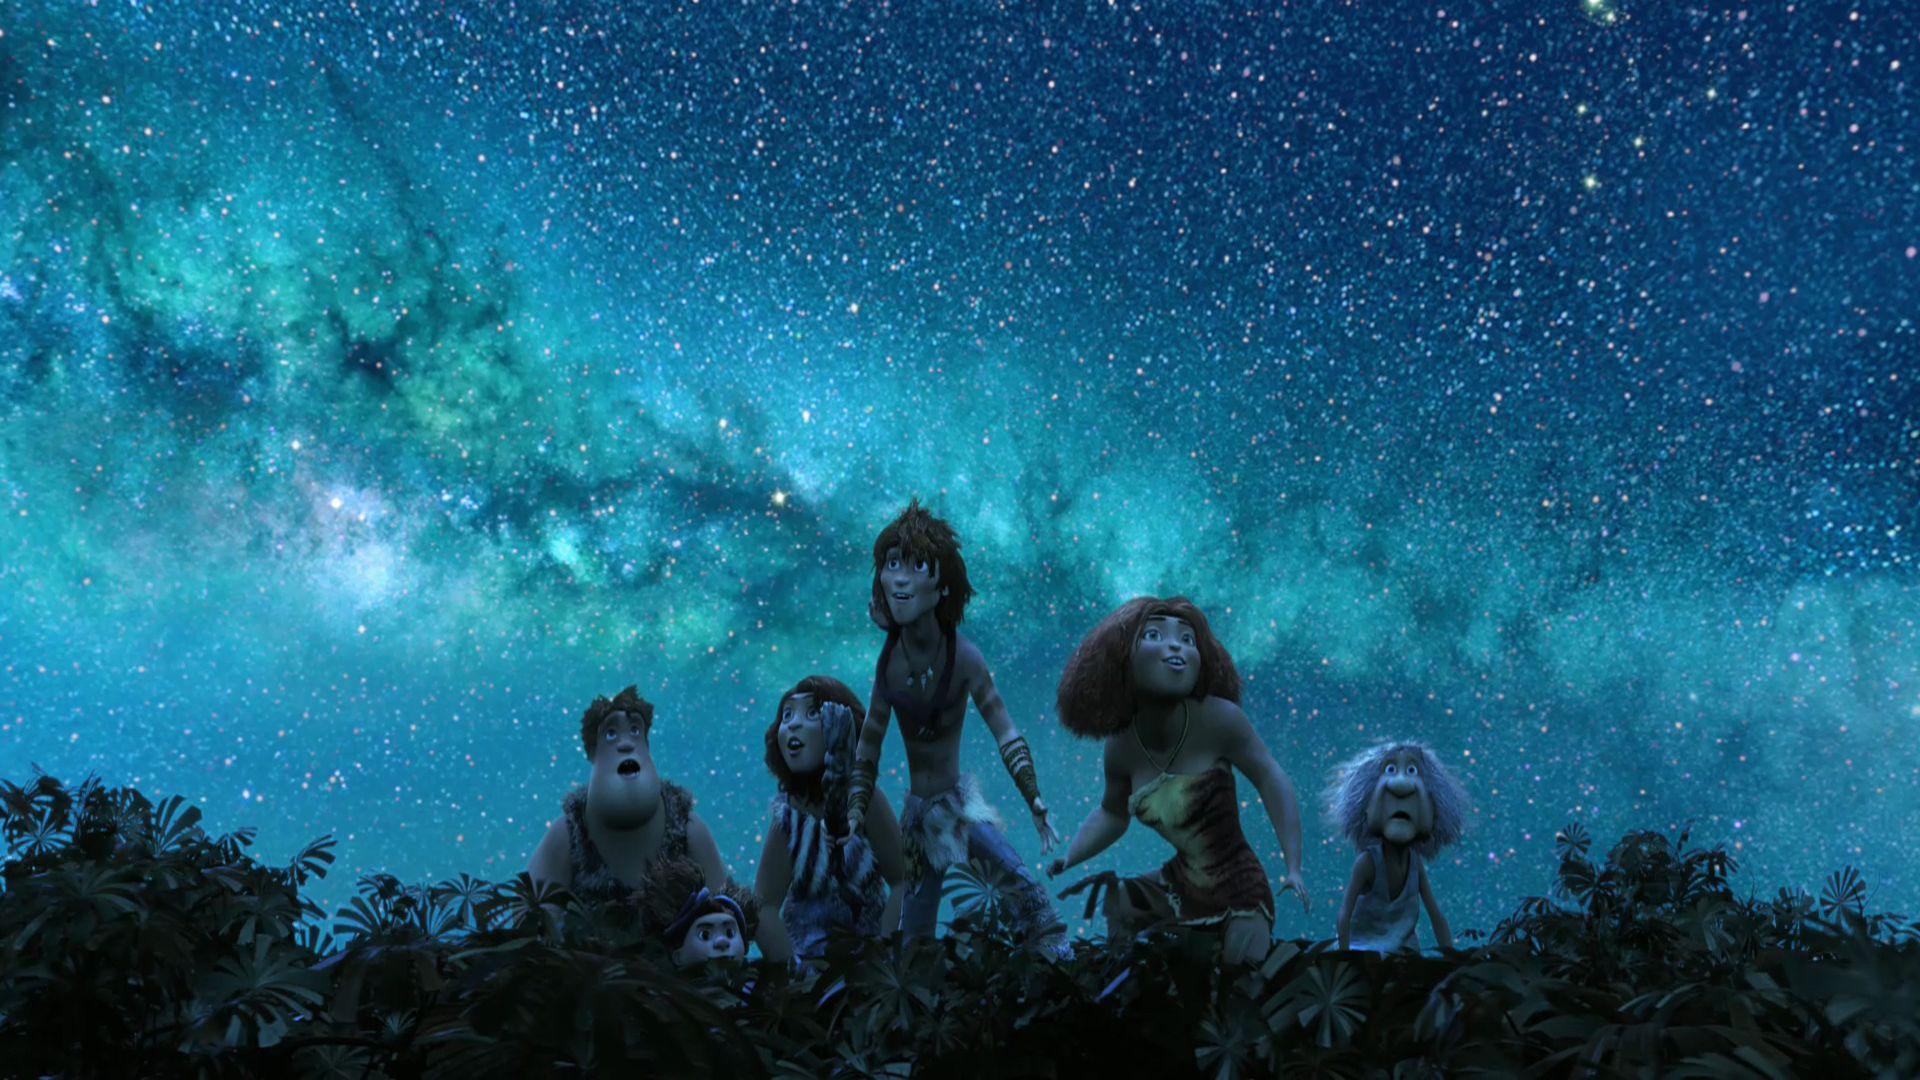 The Croods (2013) tribe Krug under the stars wallpaper